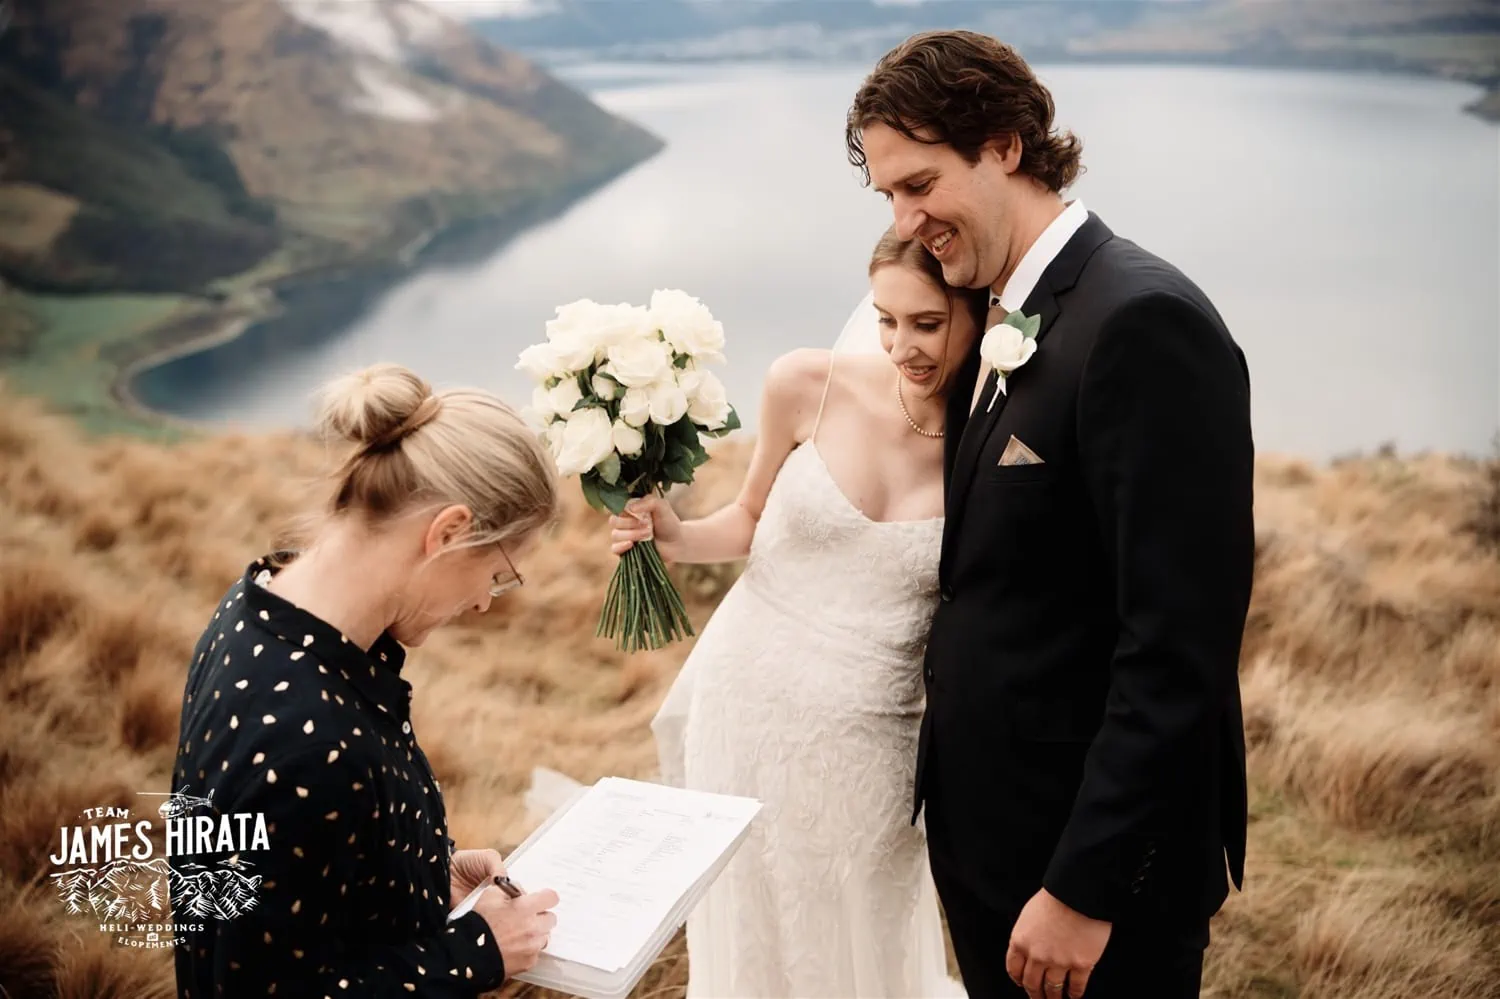 Hannah and Ross share intimate vows on a majestic New Zealand mountain during their elopement wedding in Queenstown.